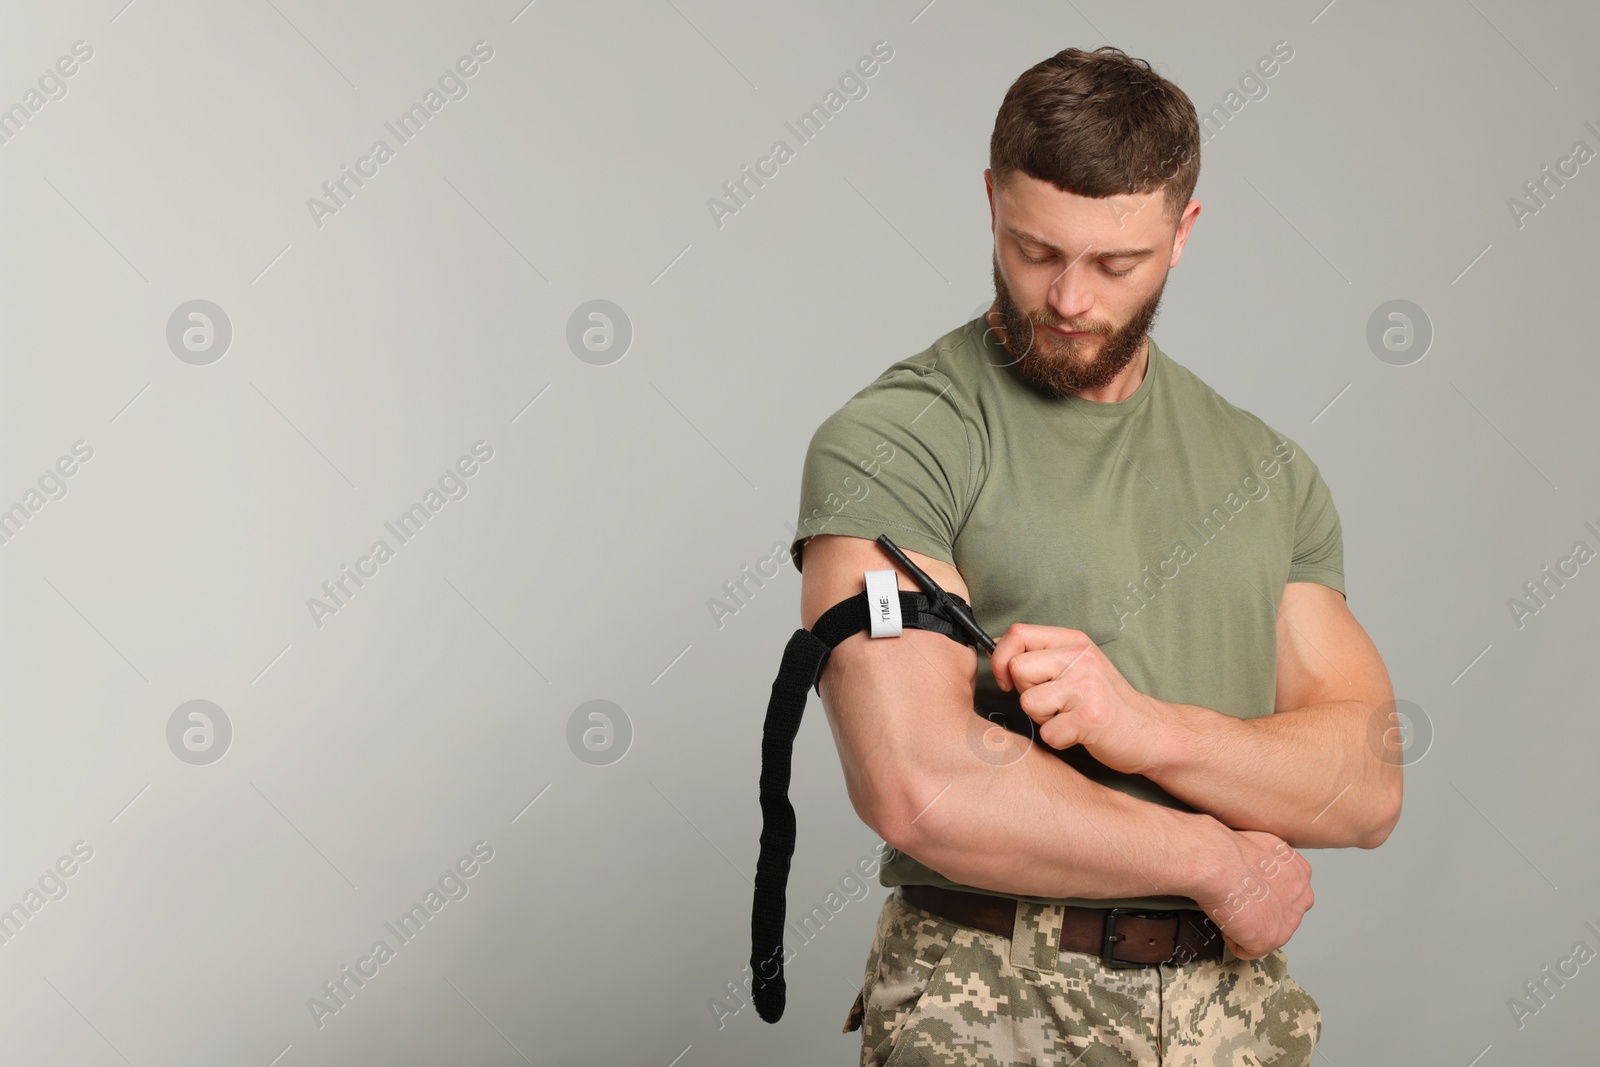 Photo of Soldier in military uniform applying medical tourniquet on arm against light grey background. Space for text